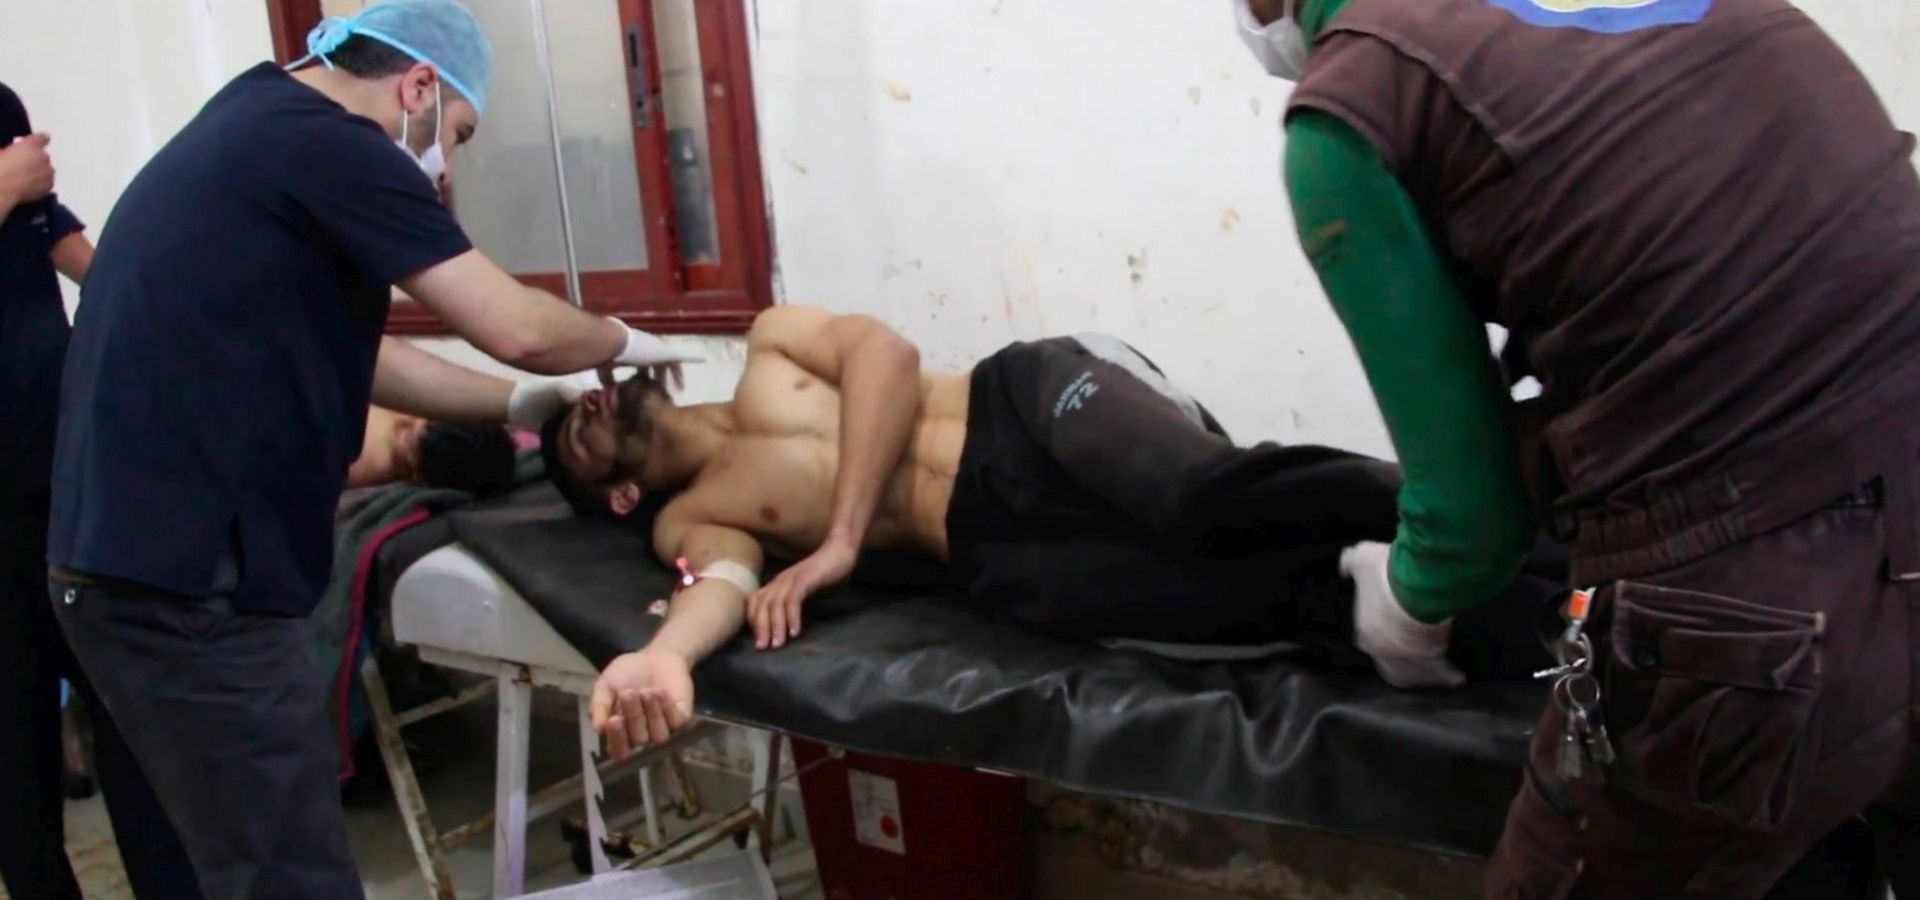 epa05887491 A video grabbed still image shows Syrian people receiving treatment after an alleged chemical attack at a field hospital in Saraqib, Idlib province, northern Syria, 04 April 2017. Media reports quoting the British war monitor Syrian Observatory for Human Rights state an alleged chemical attack in the rebel-held area of Idlib province on 04 April killed at least 58 people, including 11 minors, and wounded dozens others.  EPA/STRINGER